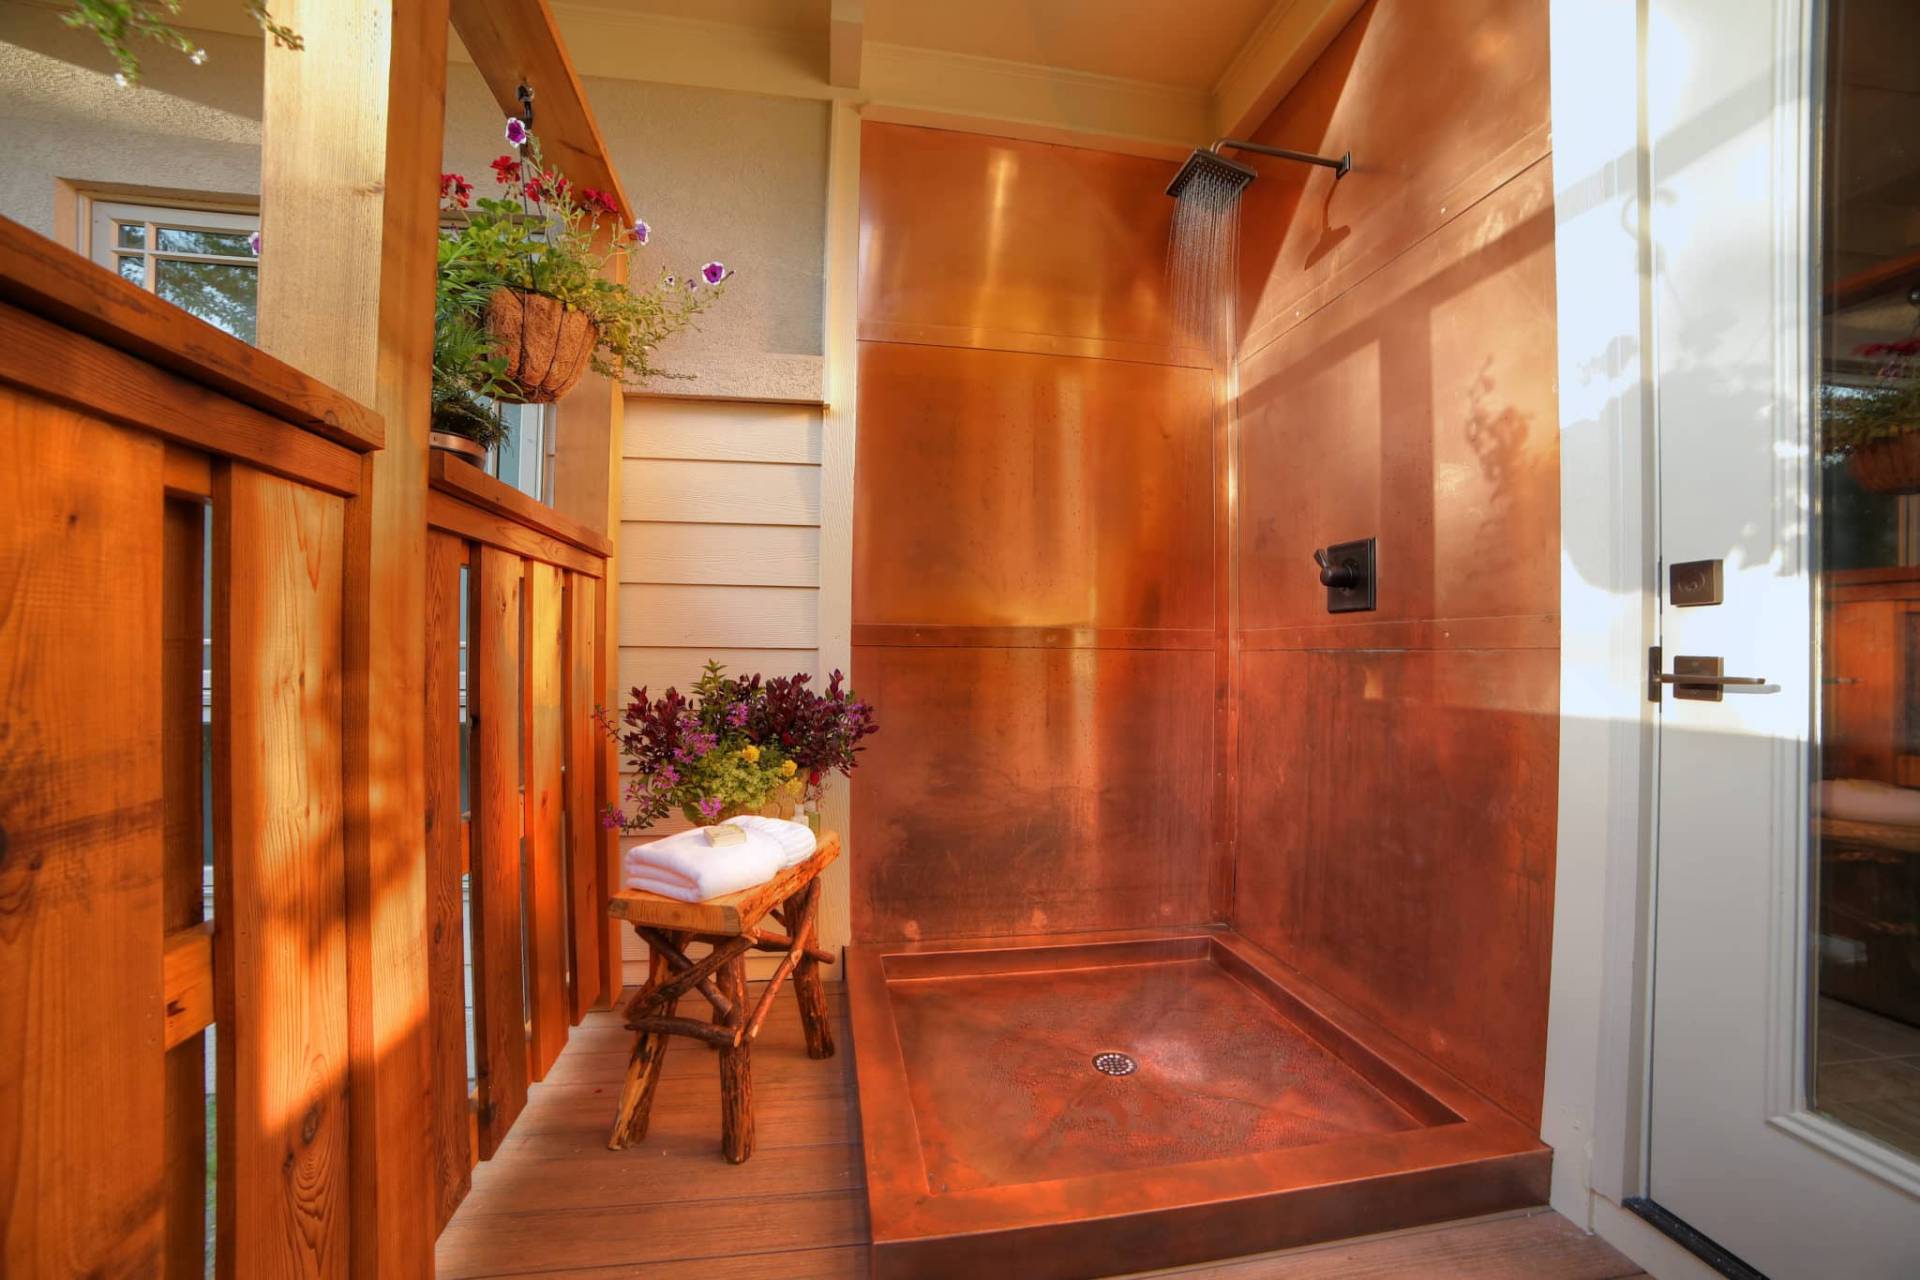 An Exterior located copper shower with old timey shower head and rustic wooden chair. 